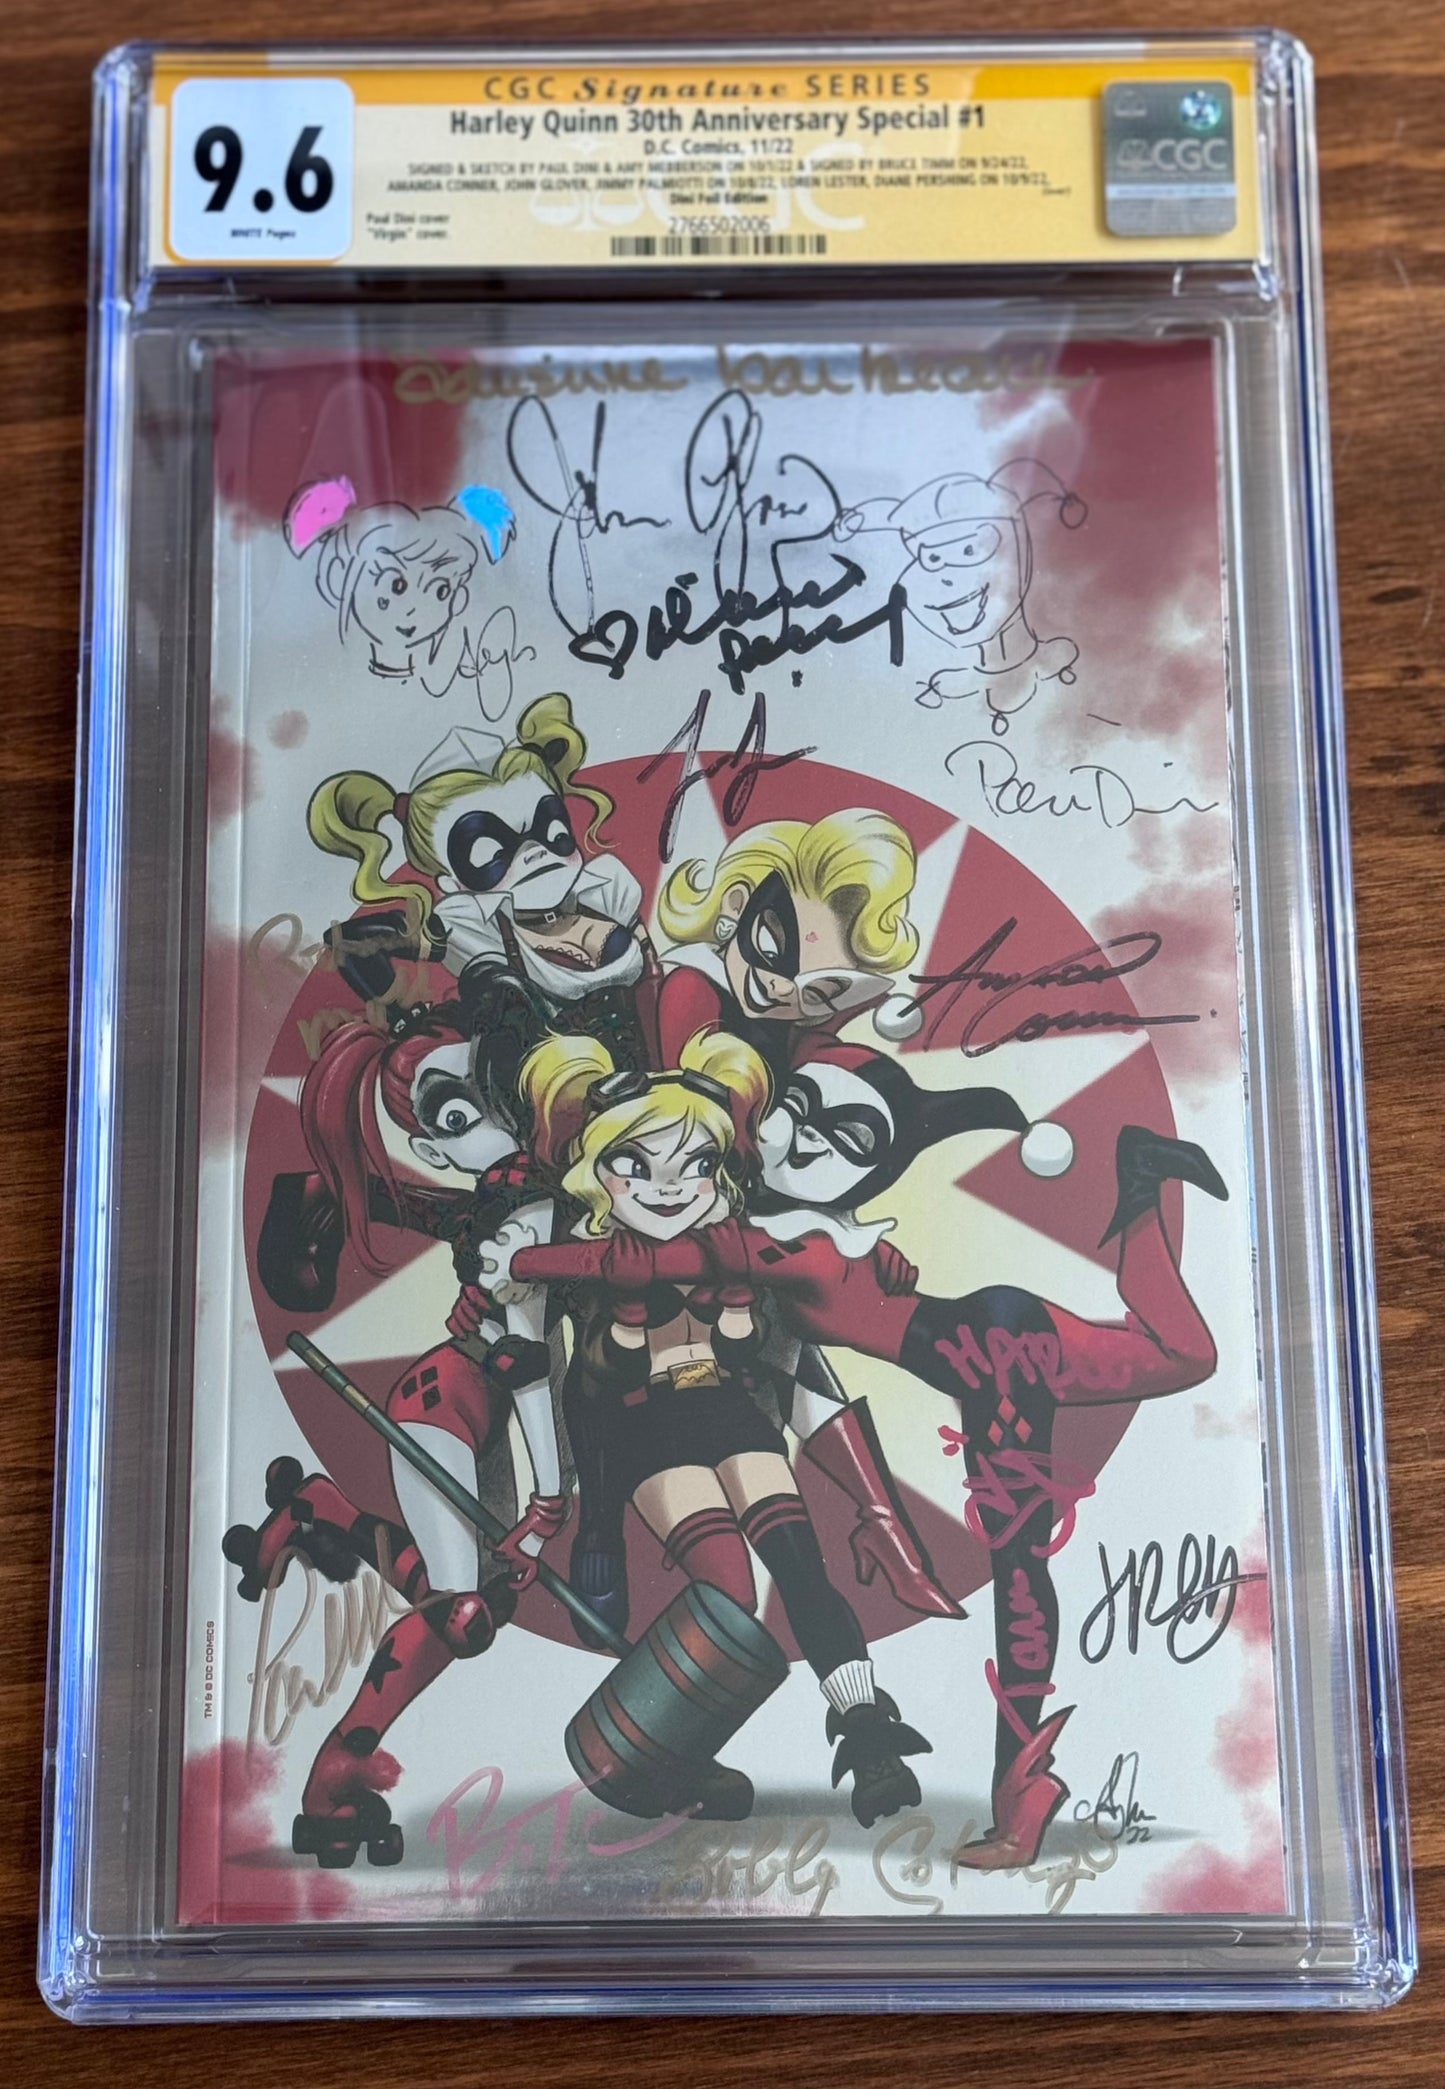 Harley Quinn 30th Anniversary Special #1 Paul Dini FOIL Virgin Exclusive SIGNED by Paul Dini CGC SS